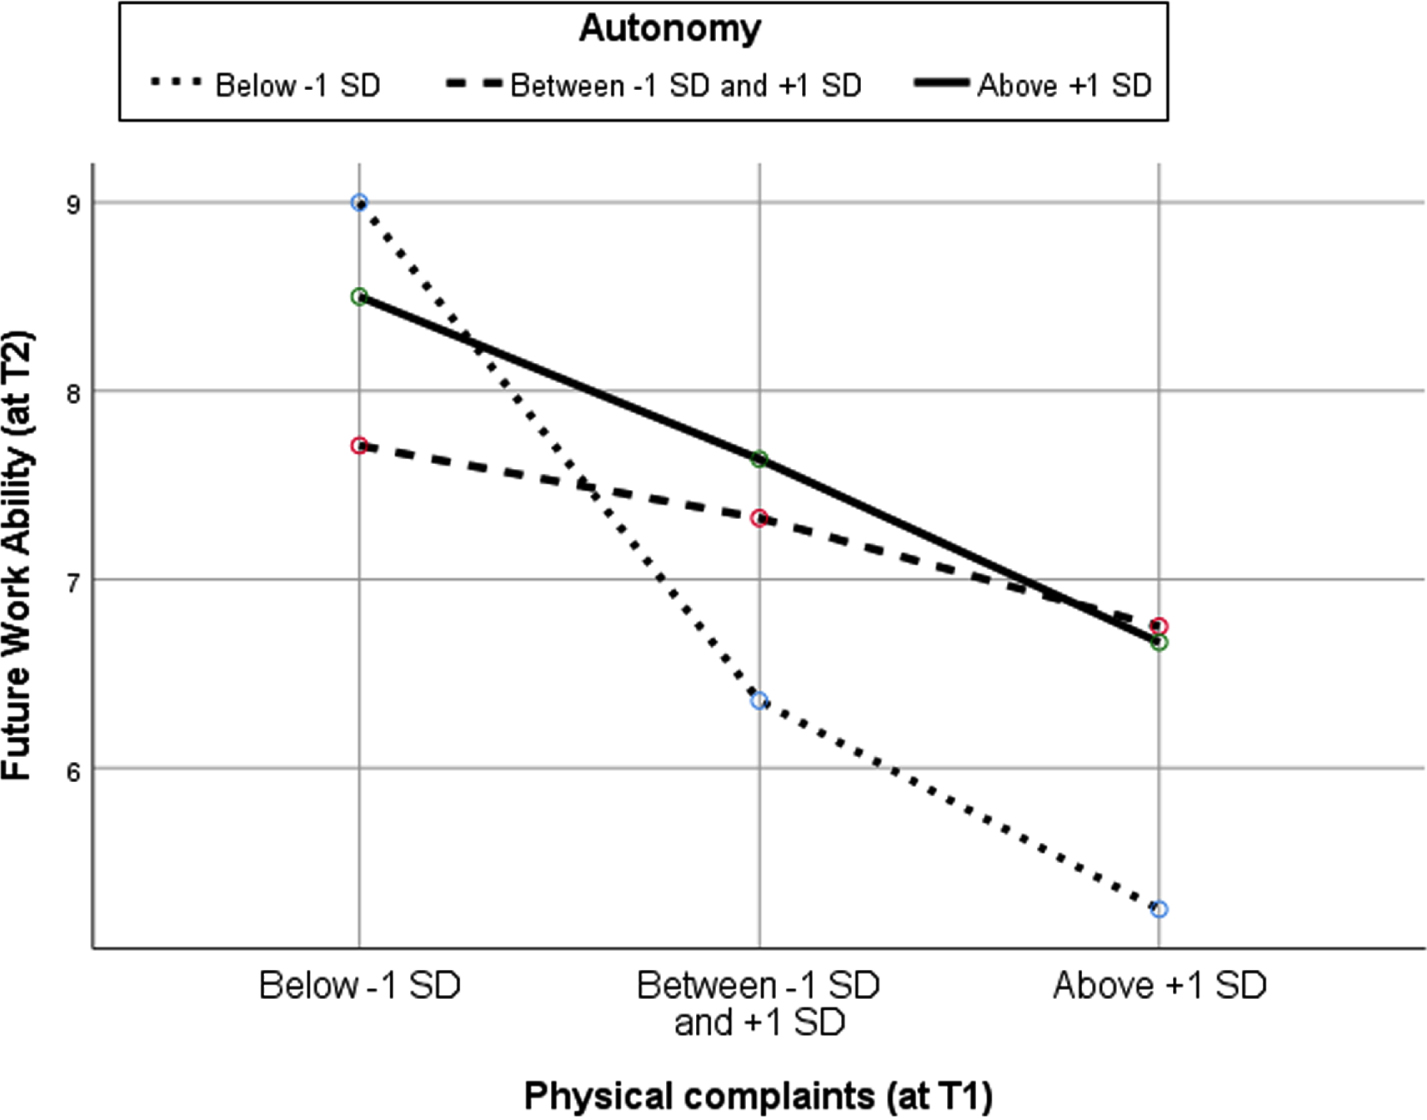 Moderation by autonomy (at T1) of the association of physical complaints (at T1) with future work ability (at T2) among workers 2-10 years beyond breast cancer diagnosis (N = 280).